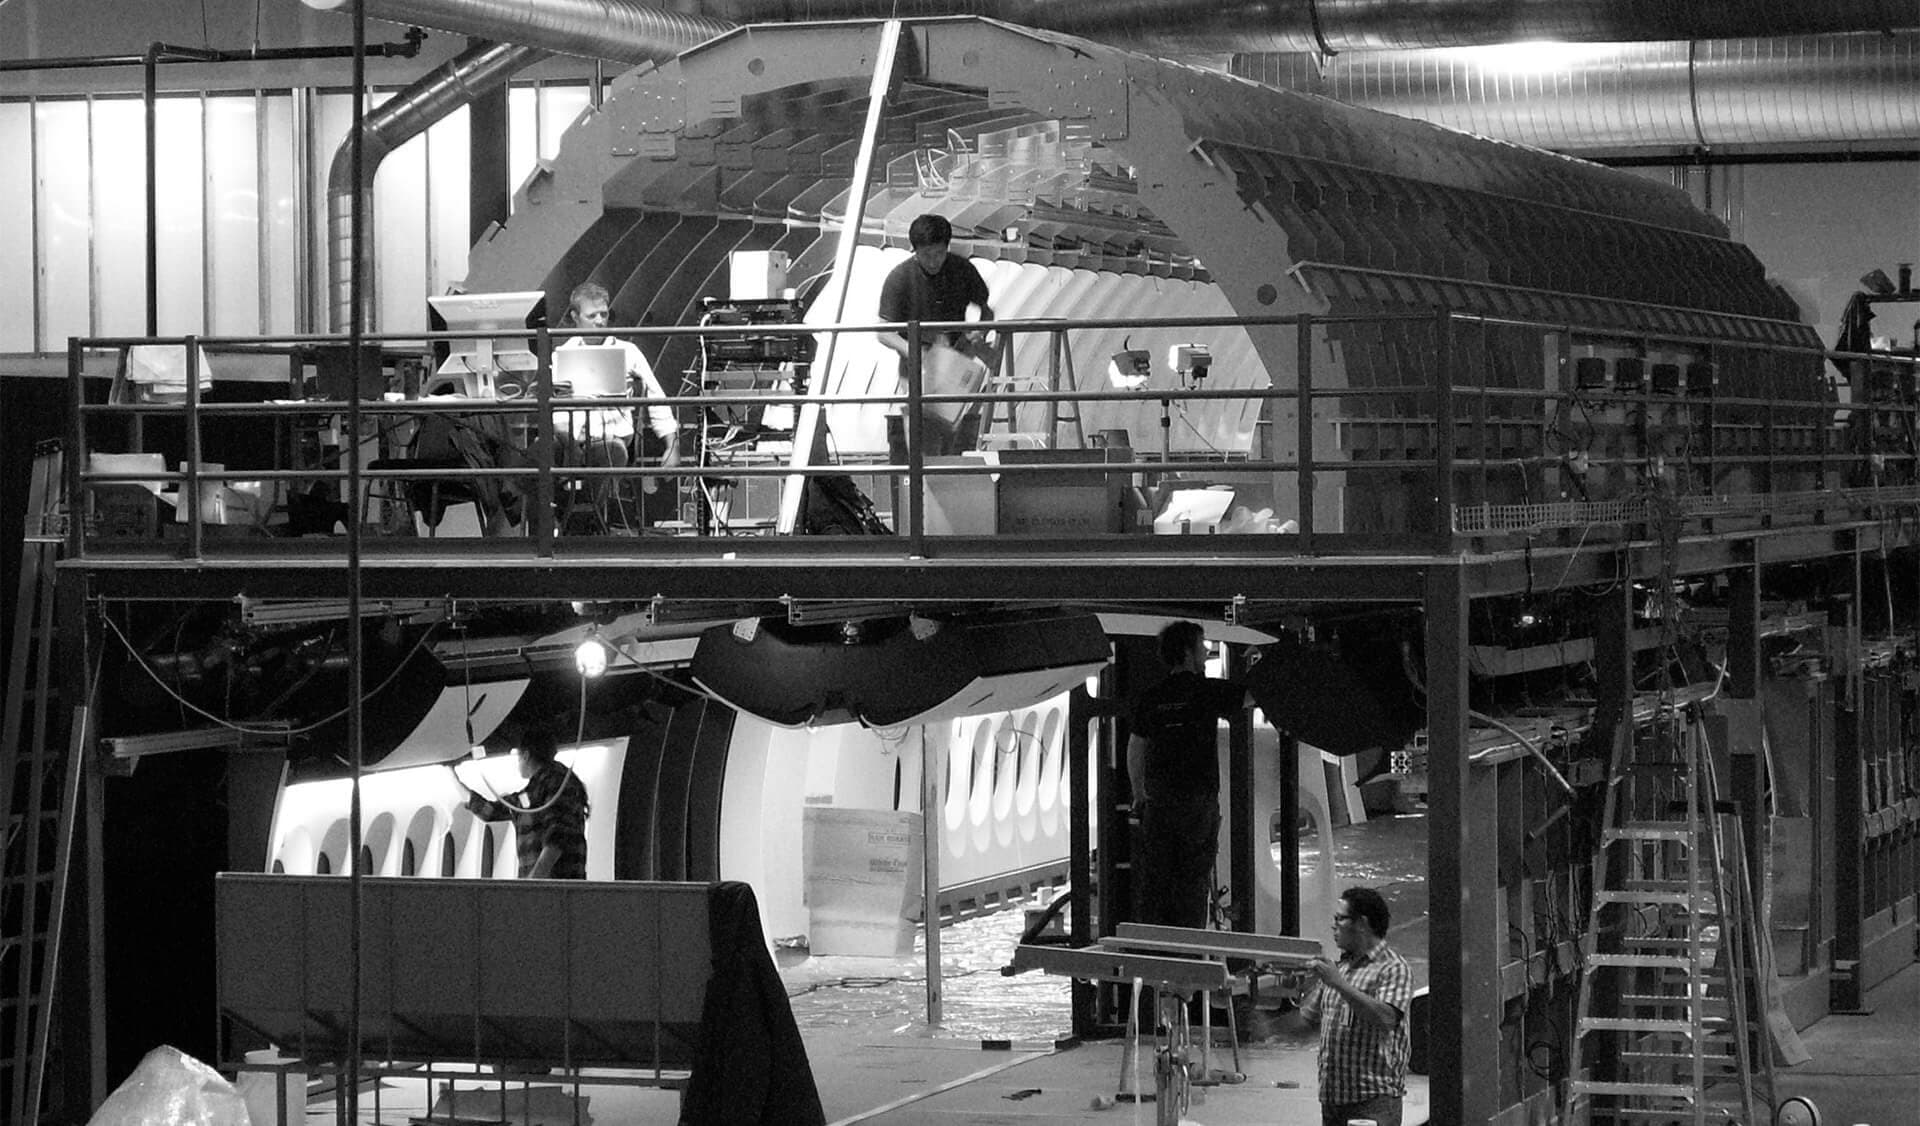 Four men working in large scale 747 mockup